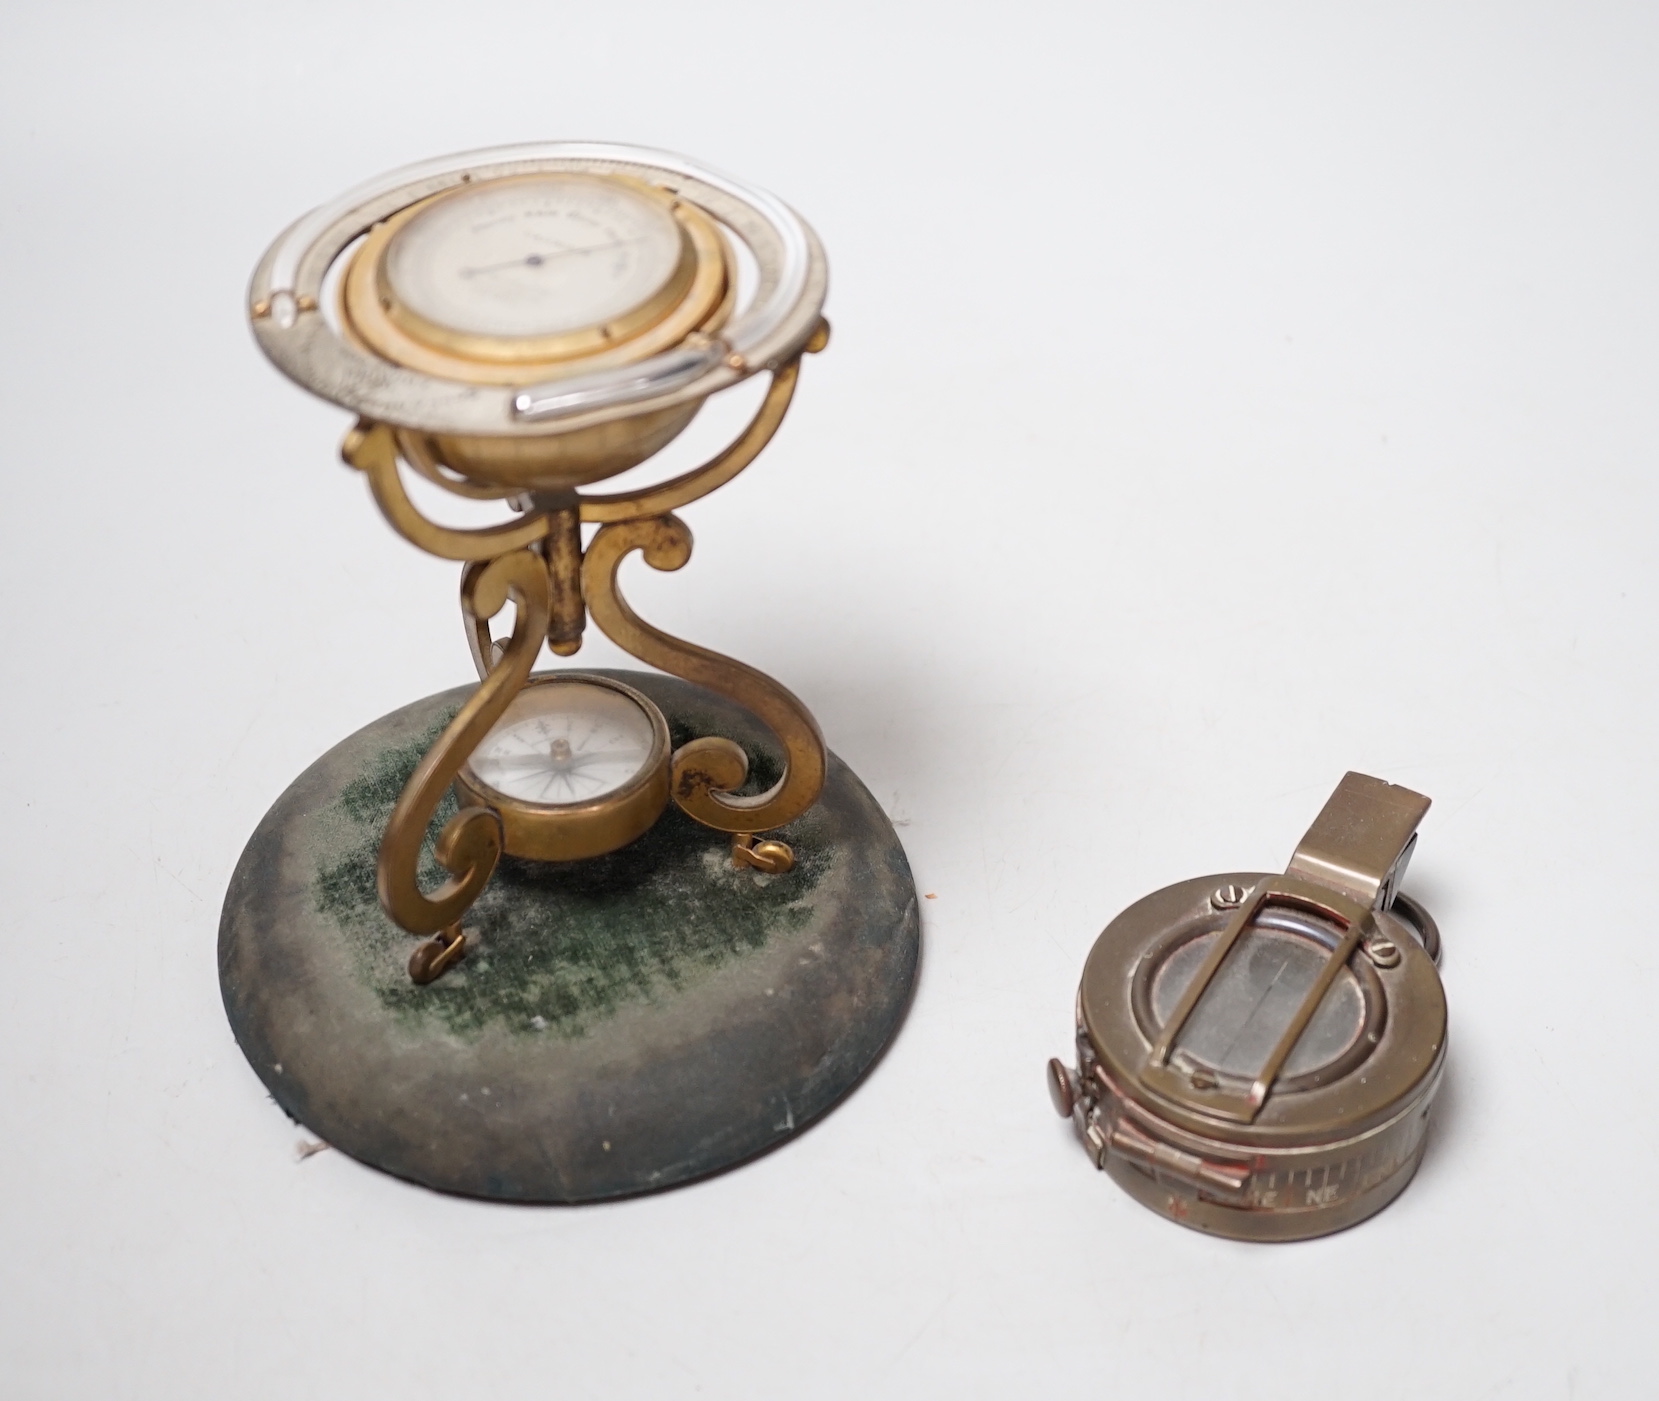 A Victorian Callaghan patent 'globe', desk barometer, thermometer and compass, 14cm high and a Sestrel compass